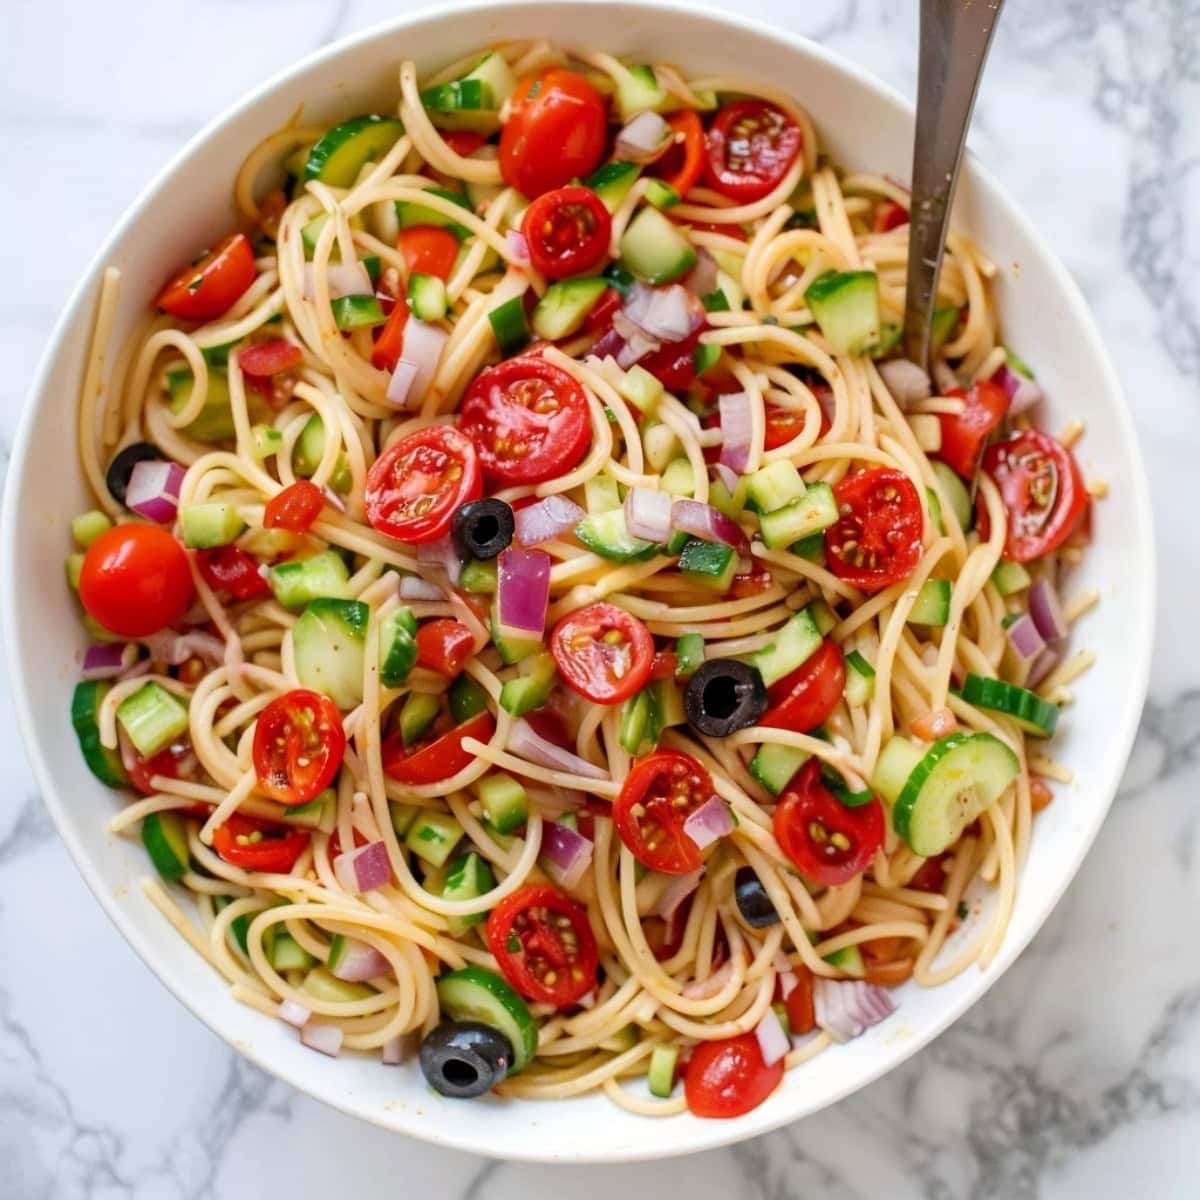 Delicious California pasta salad, tossed with cherry tomatoes, red onions and black olives.